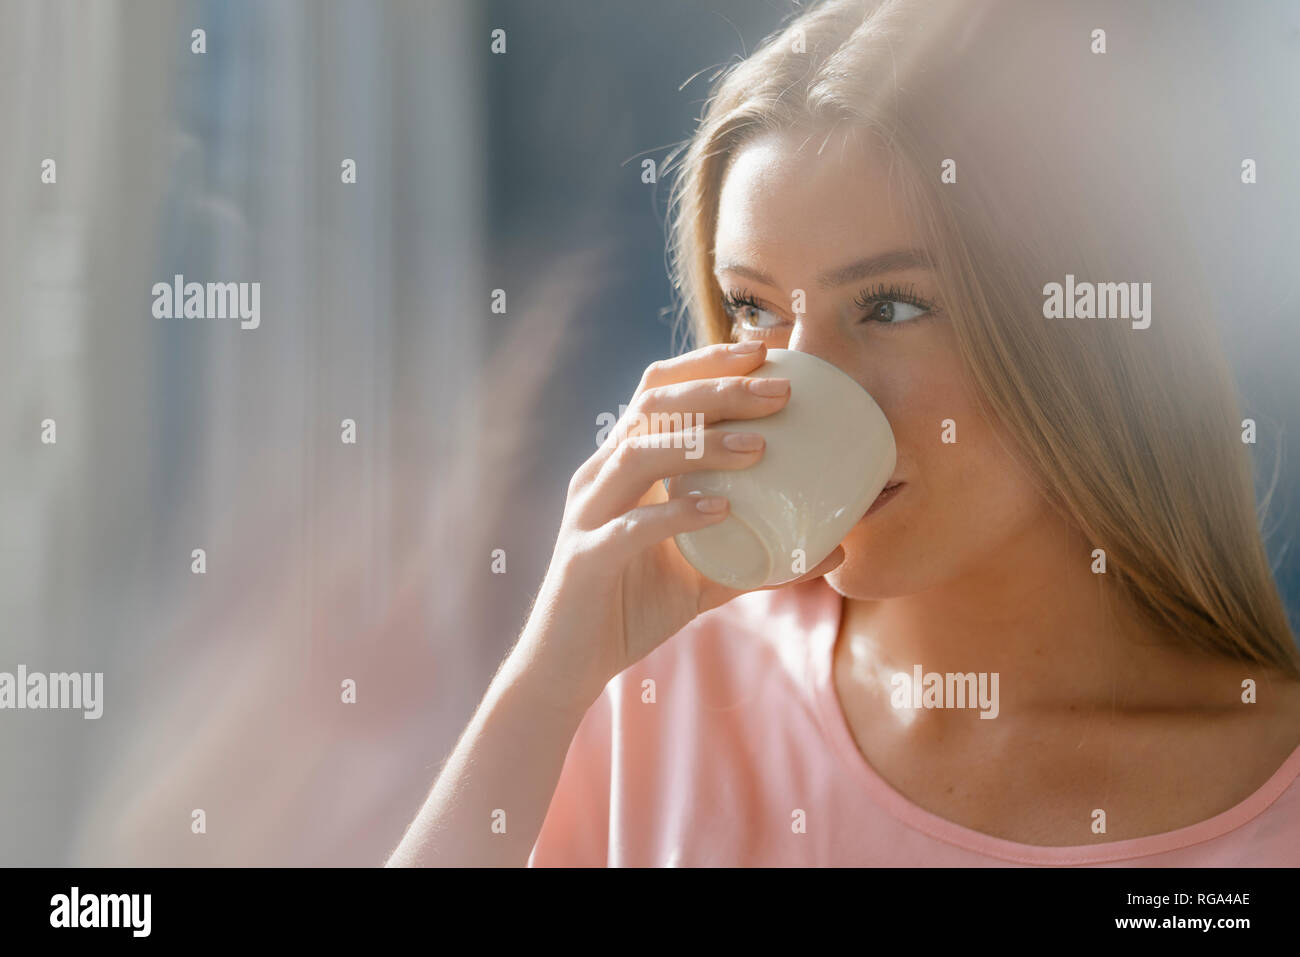 Young woman drinking cup of coffee Stock Photo